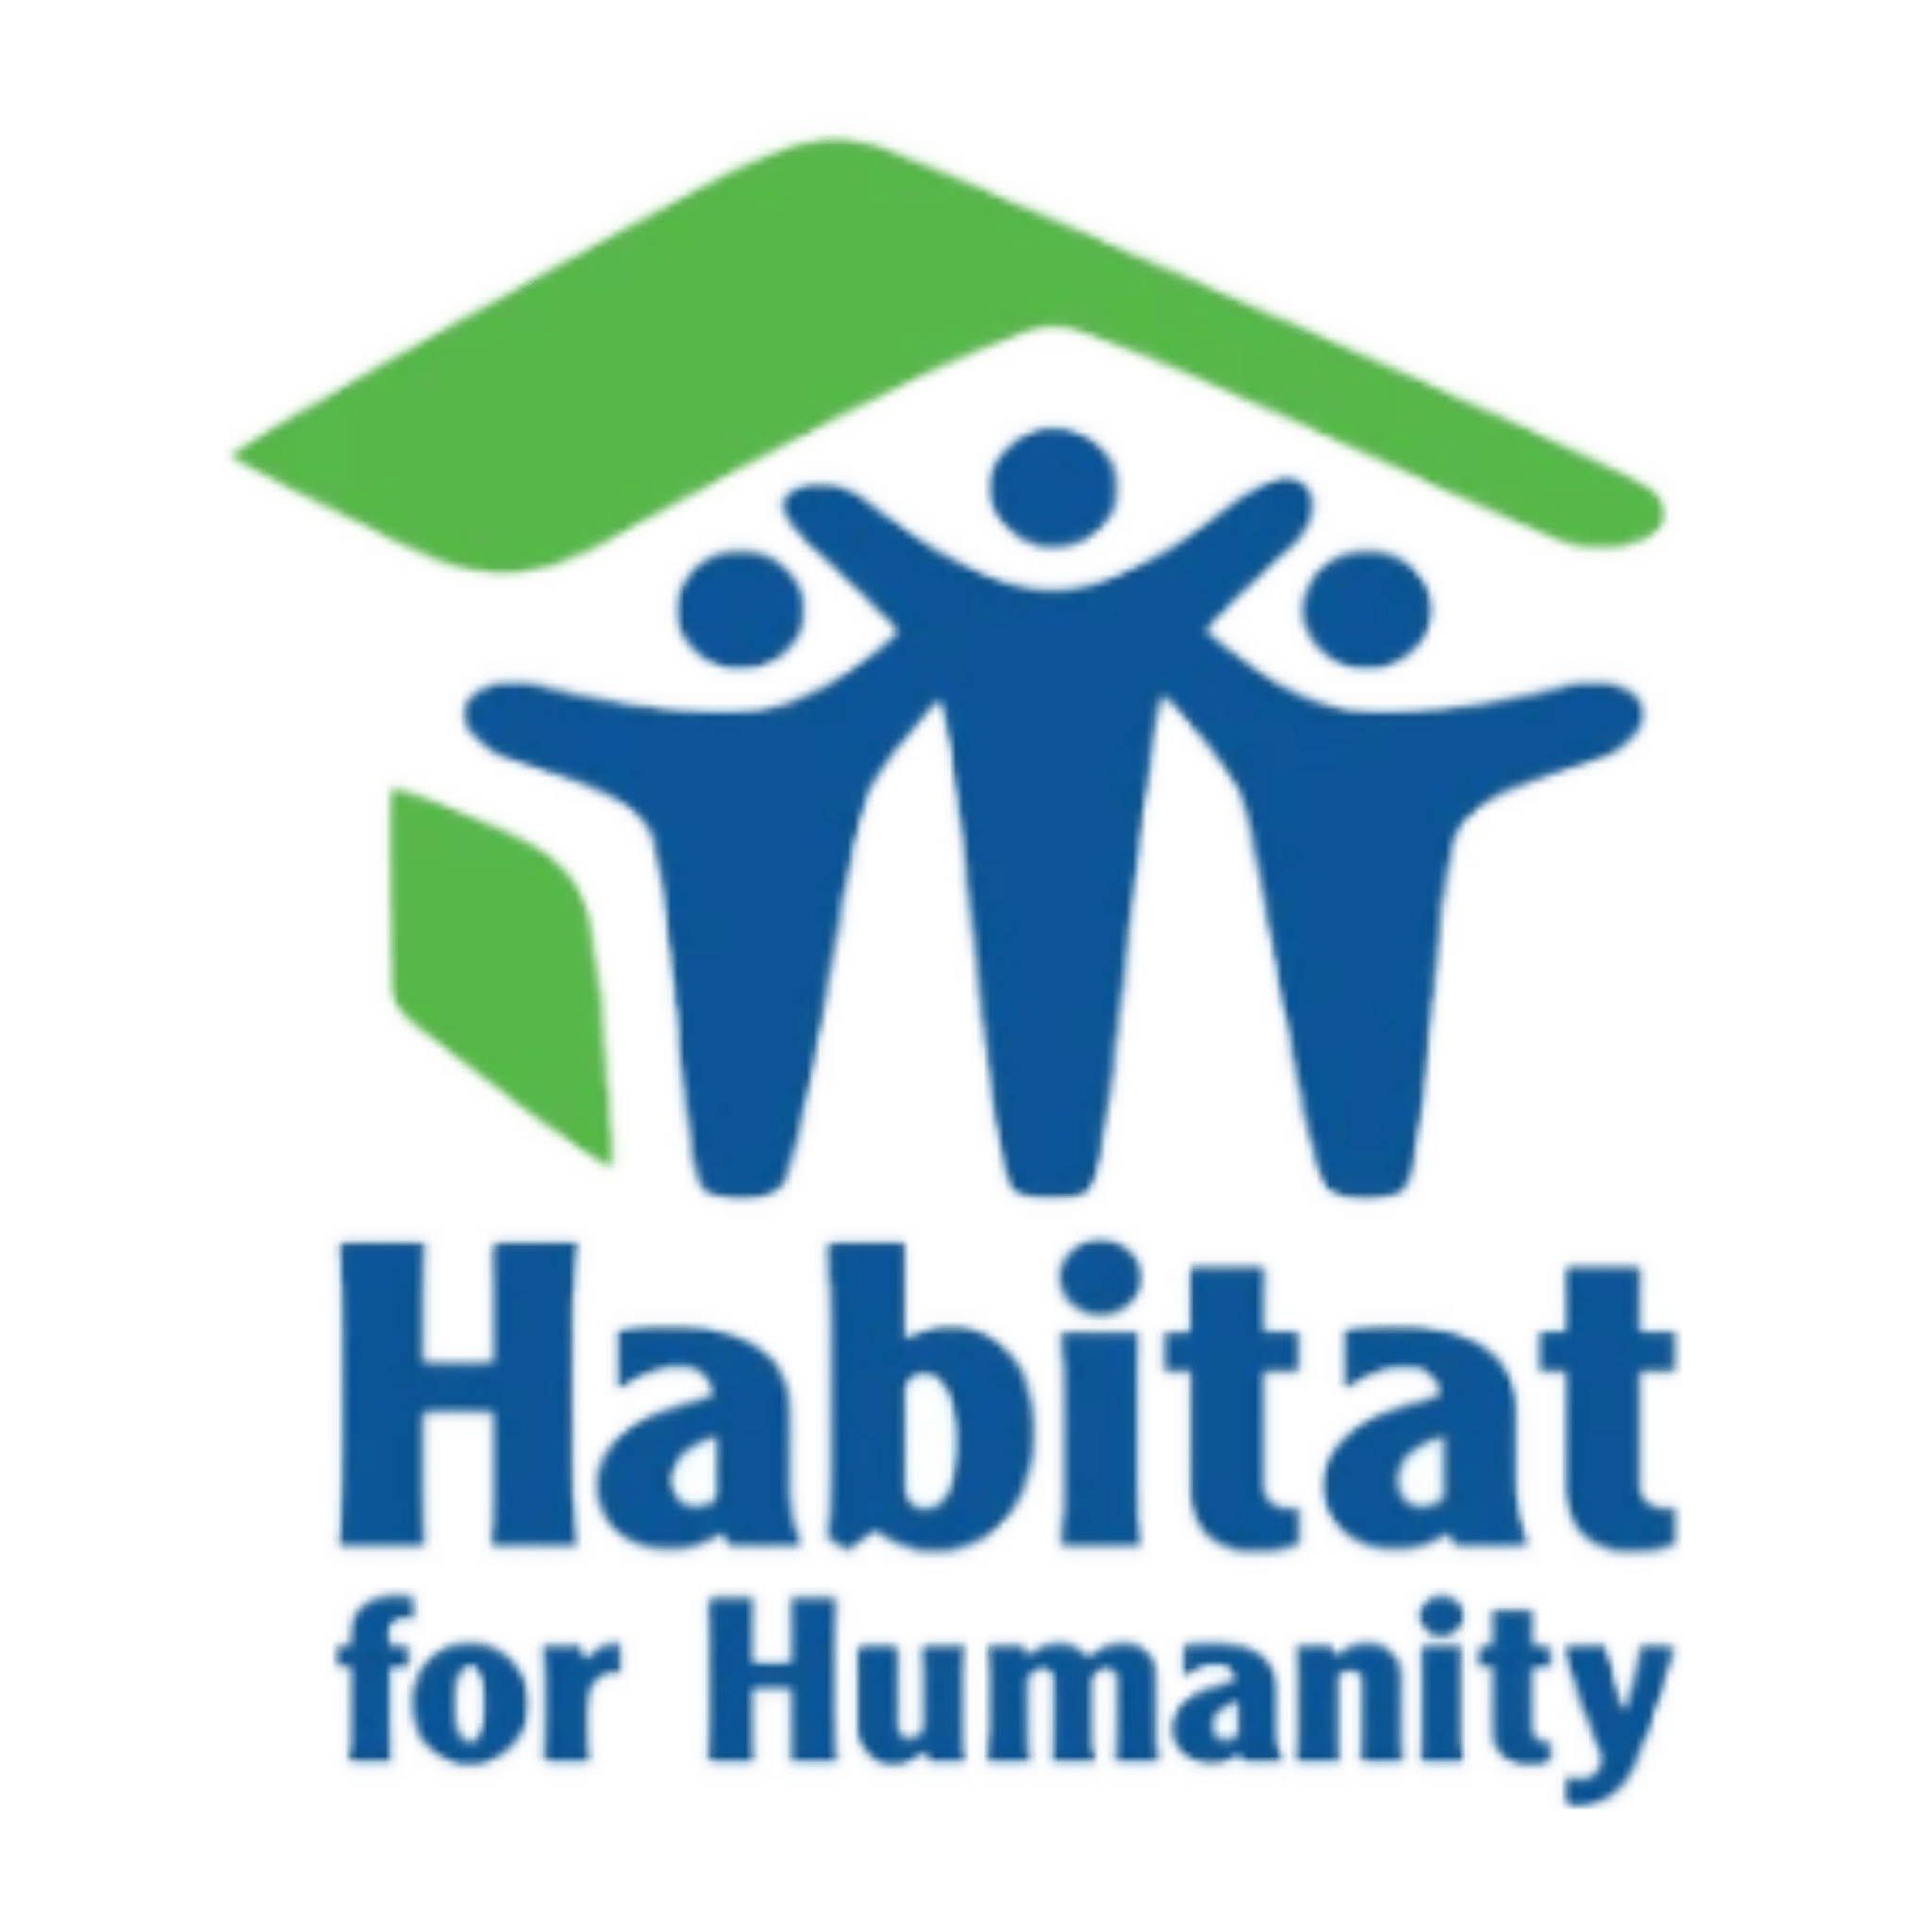 Habitat for Humanity partnered charity with Haven Mattress